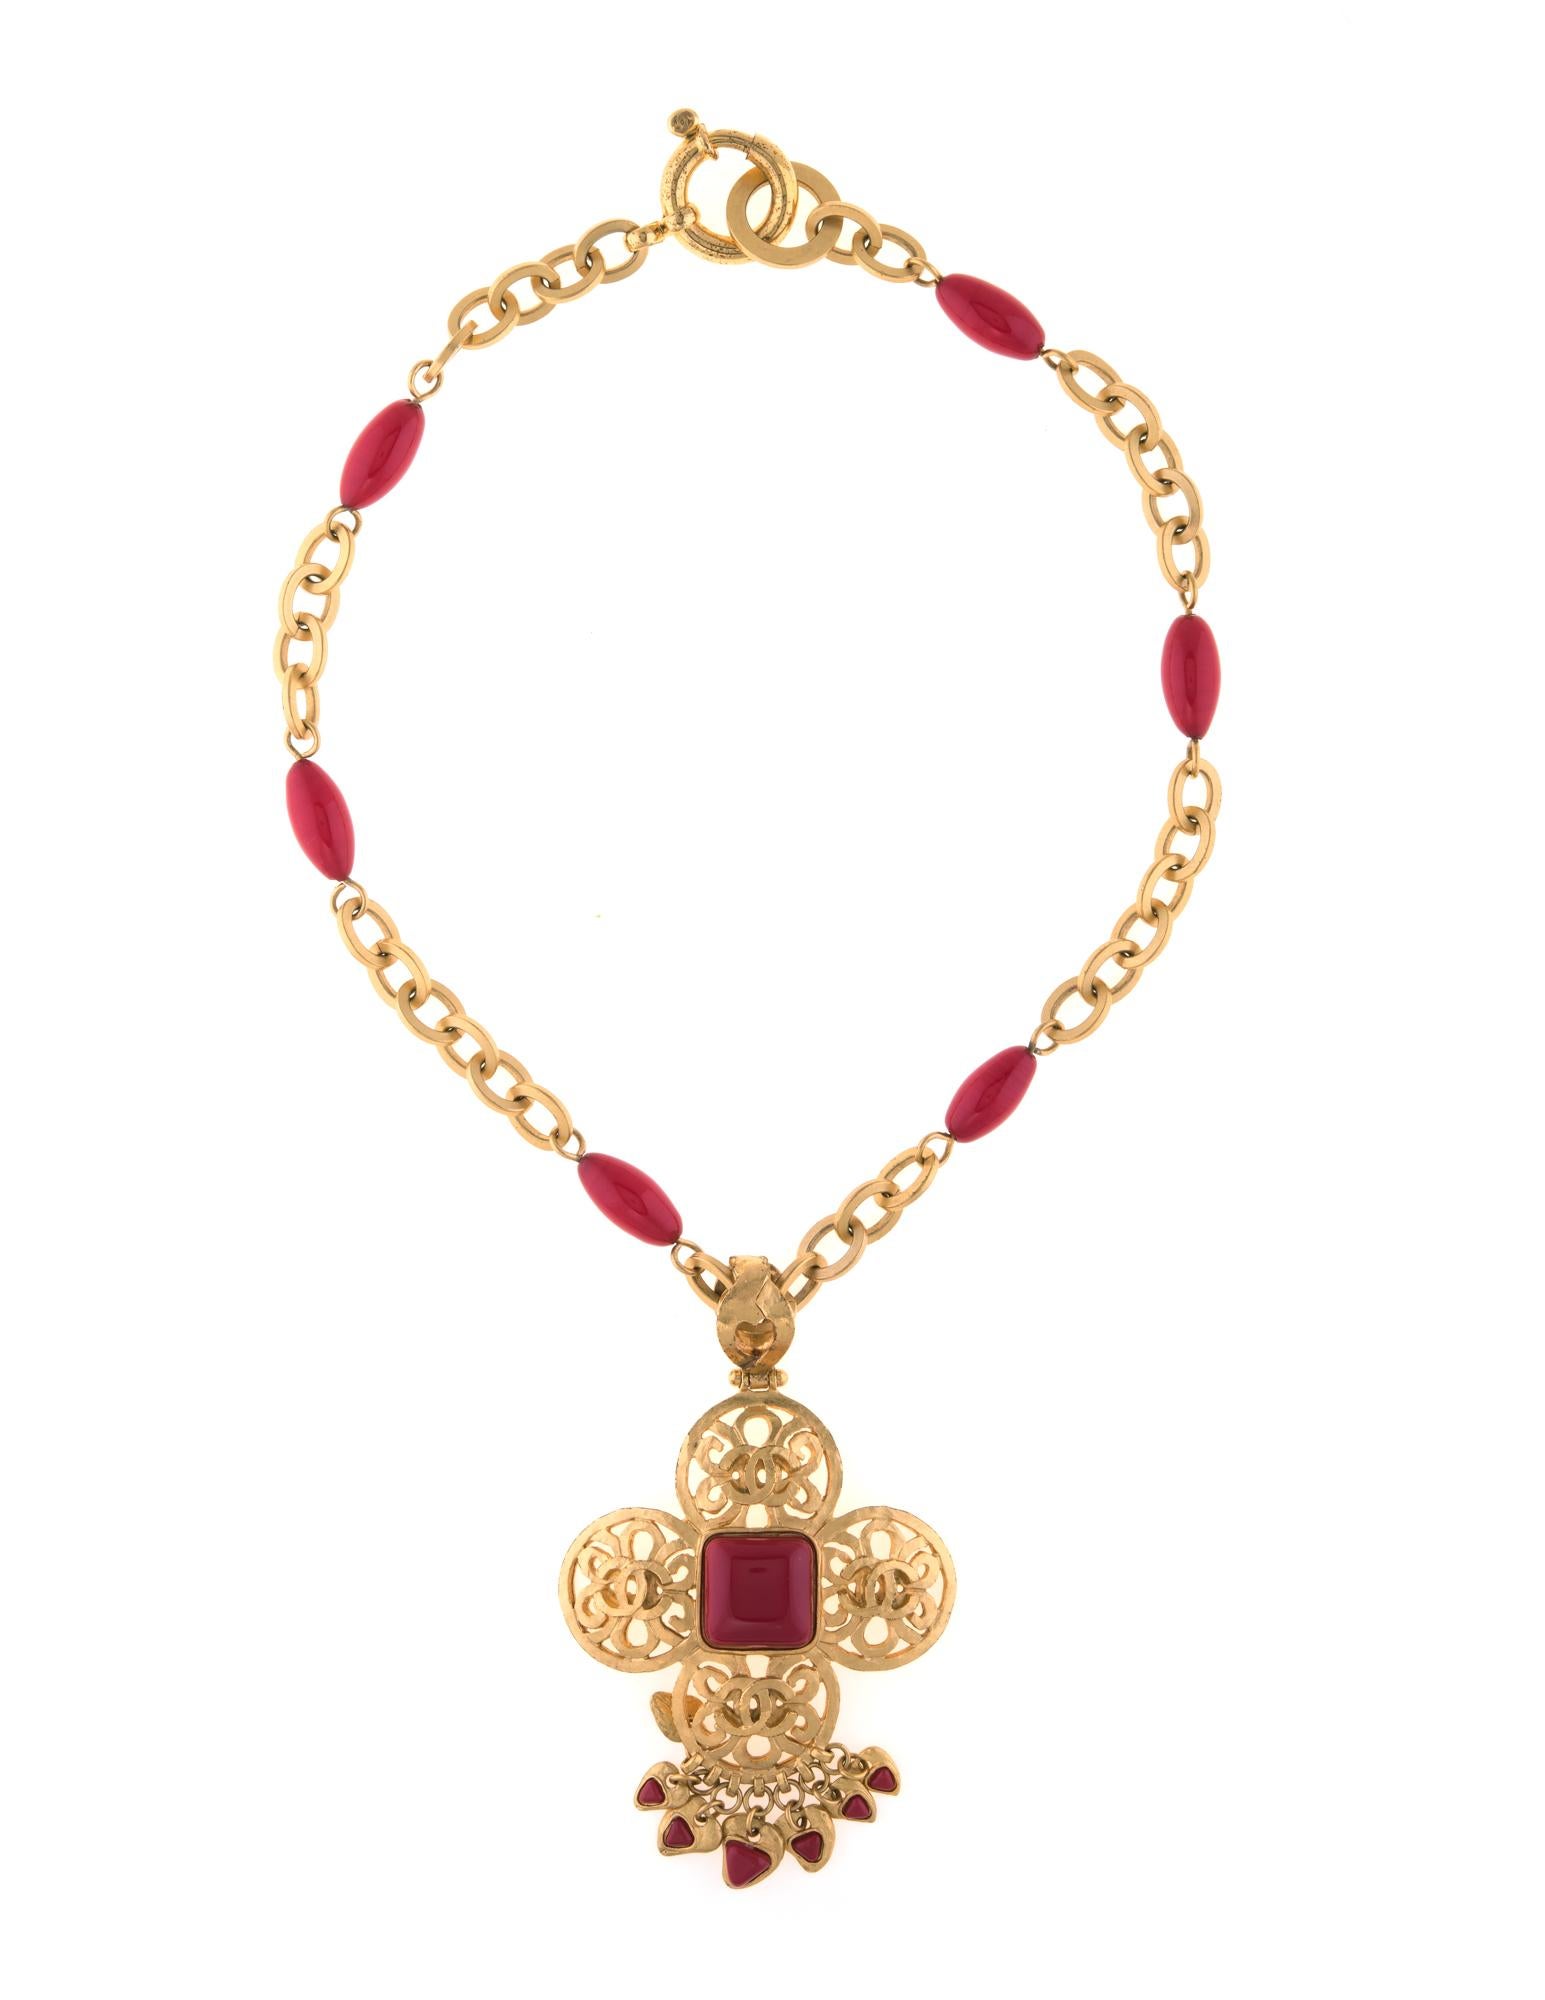 Vintage Chanel red cross necklace crafted in yellow gold tone (circa 1995).

The necklace features a large filigree cross with red resin details. The pendant is attached to a long 20 inch oval link chain. The necklace dates to 1995 from the Spring